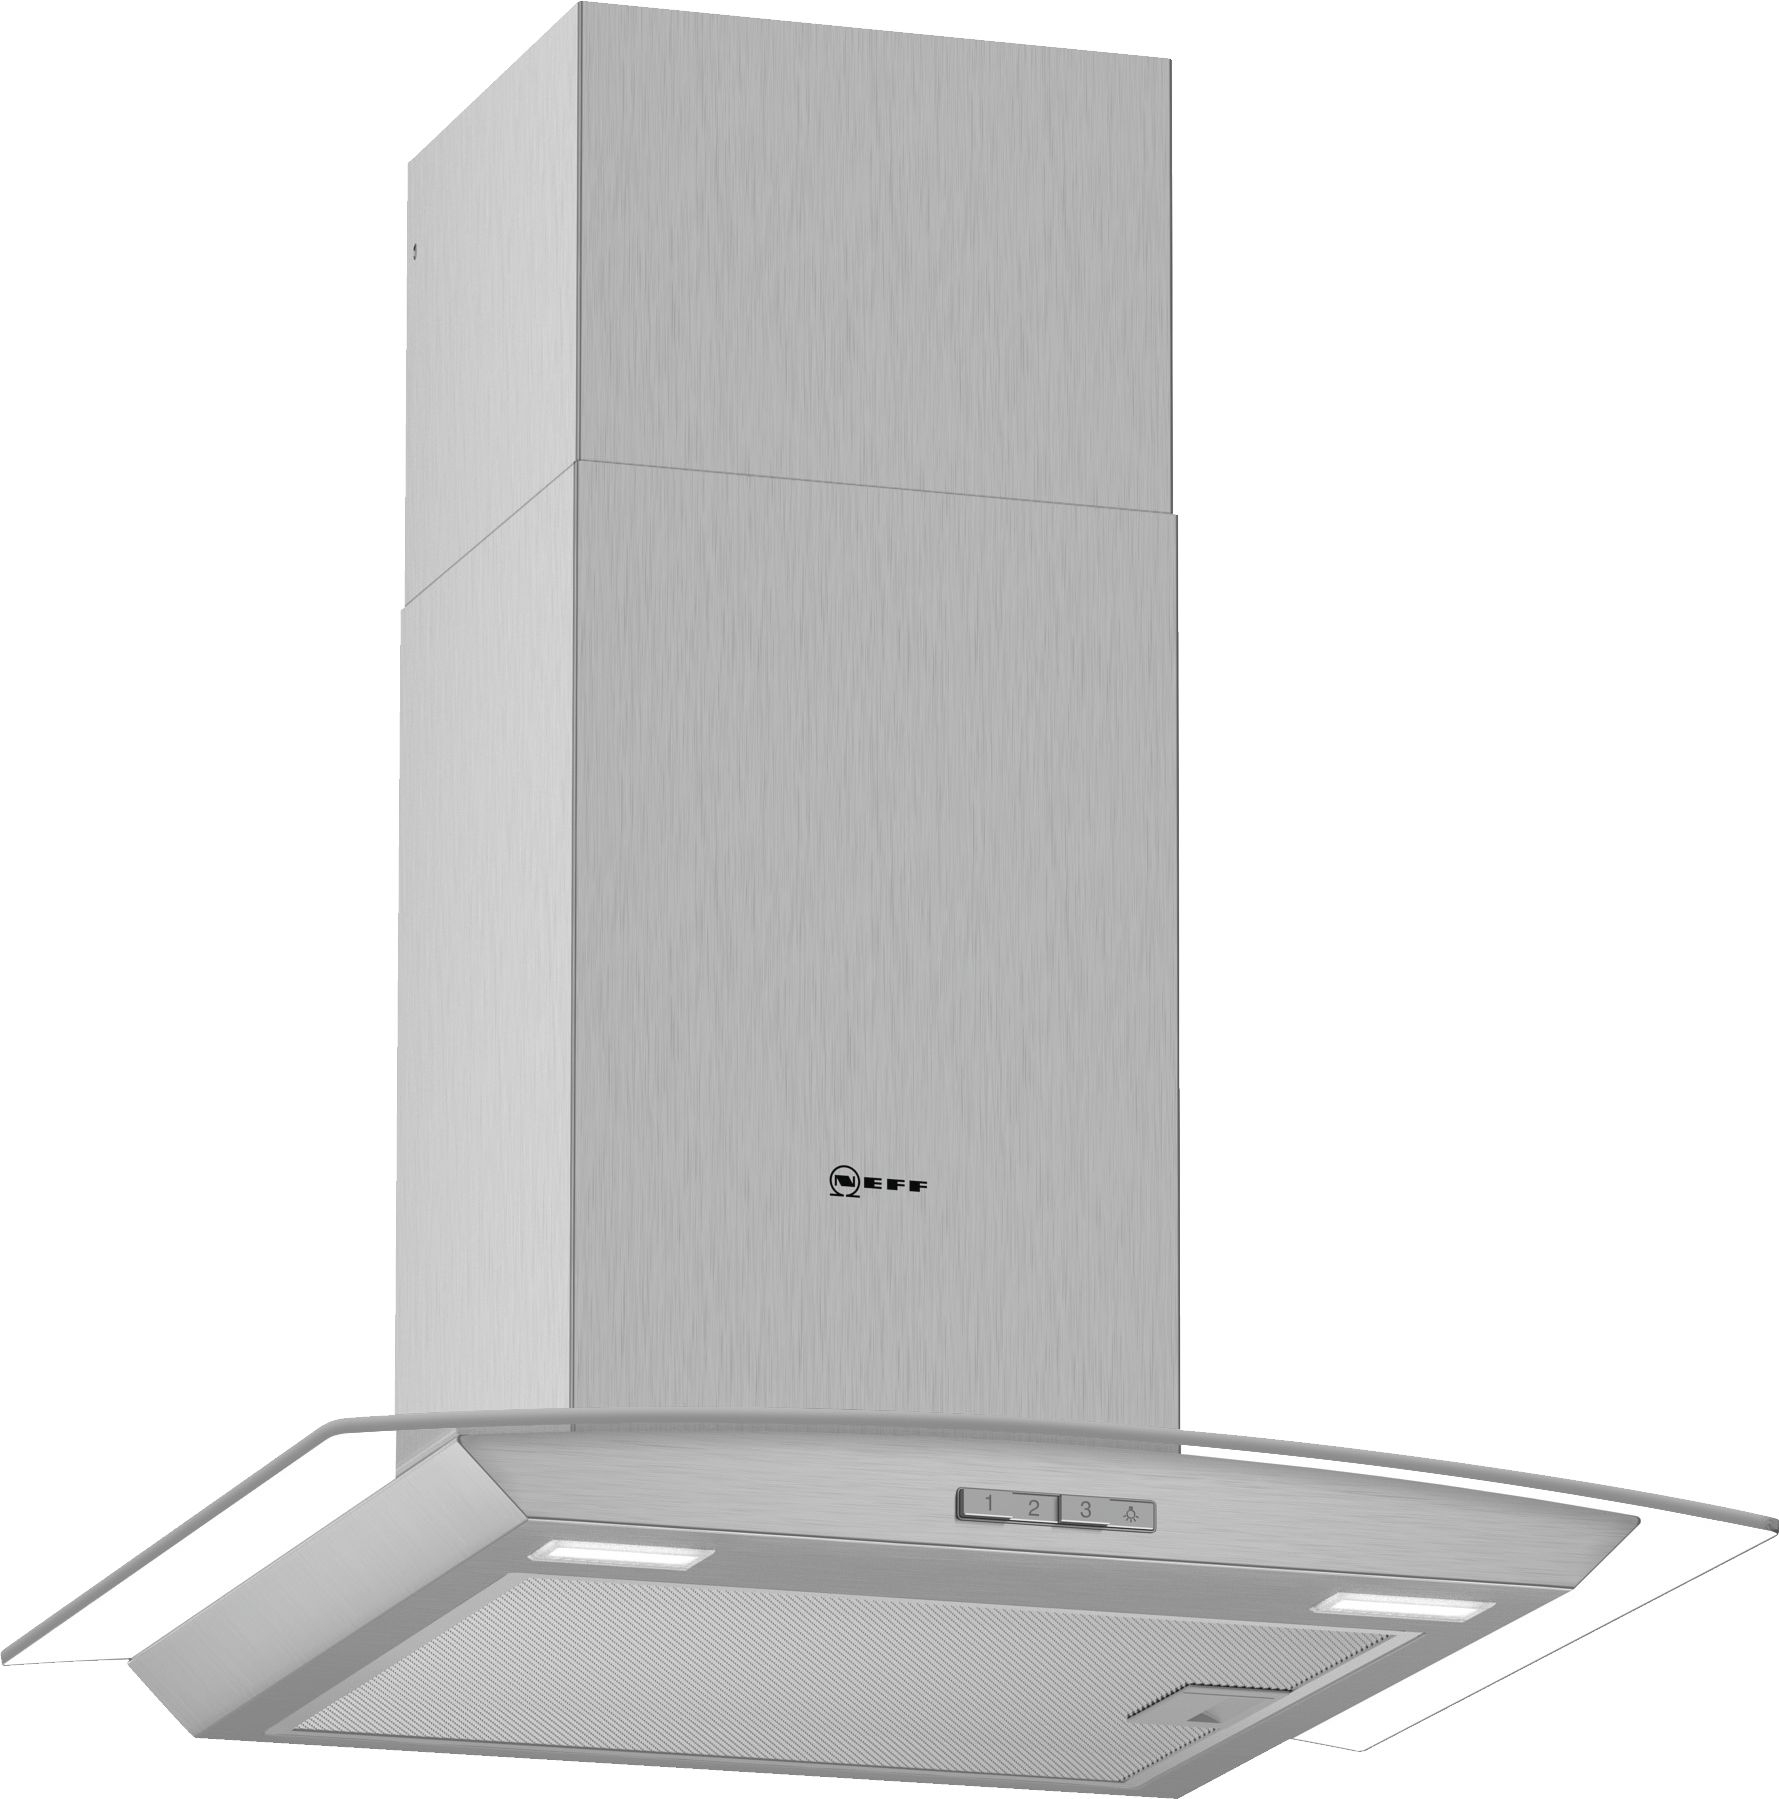 Neff D64ABC0N0B 60cm Curved Chimney Cooker Hood - Stainless Steel